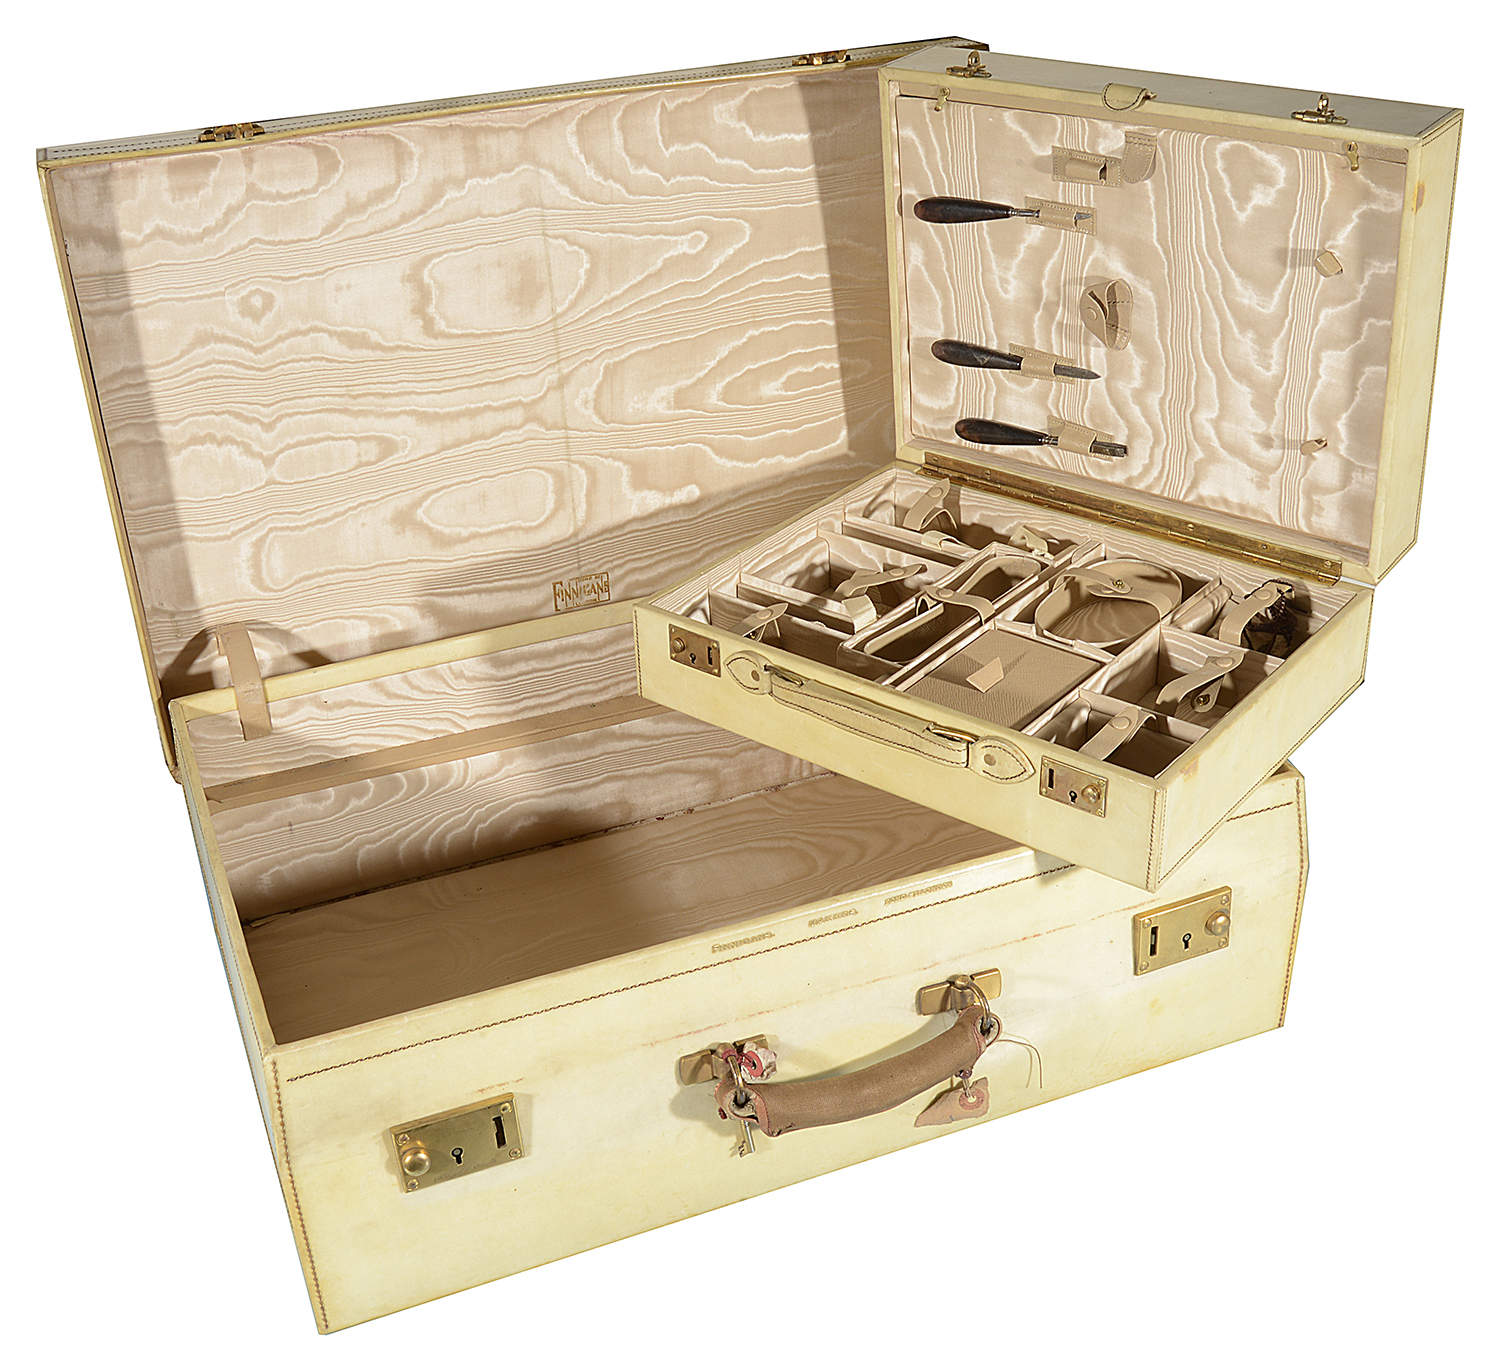 A Finnigans of Bond Street London vellum travelling suitcase and vanity case, early 20th century